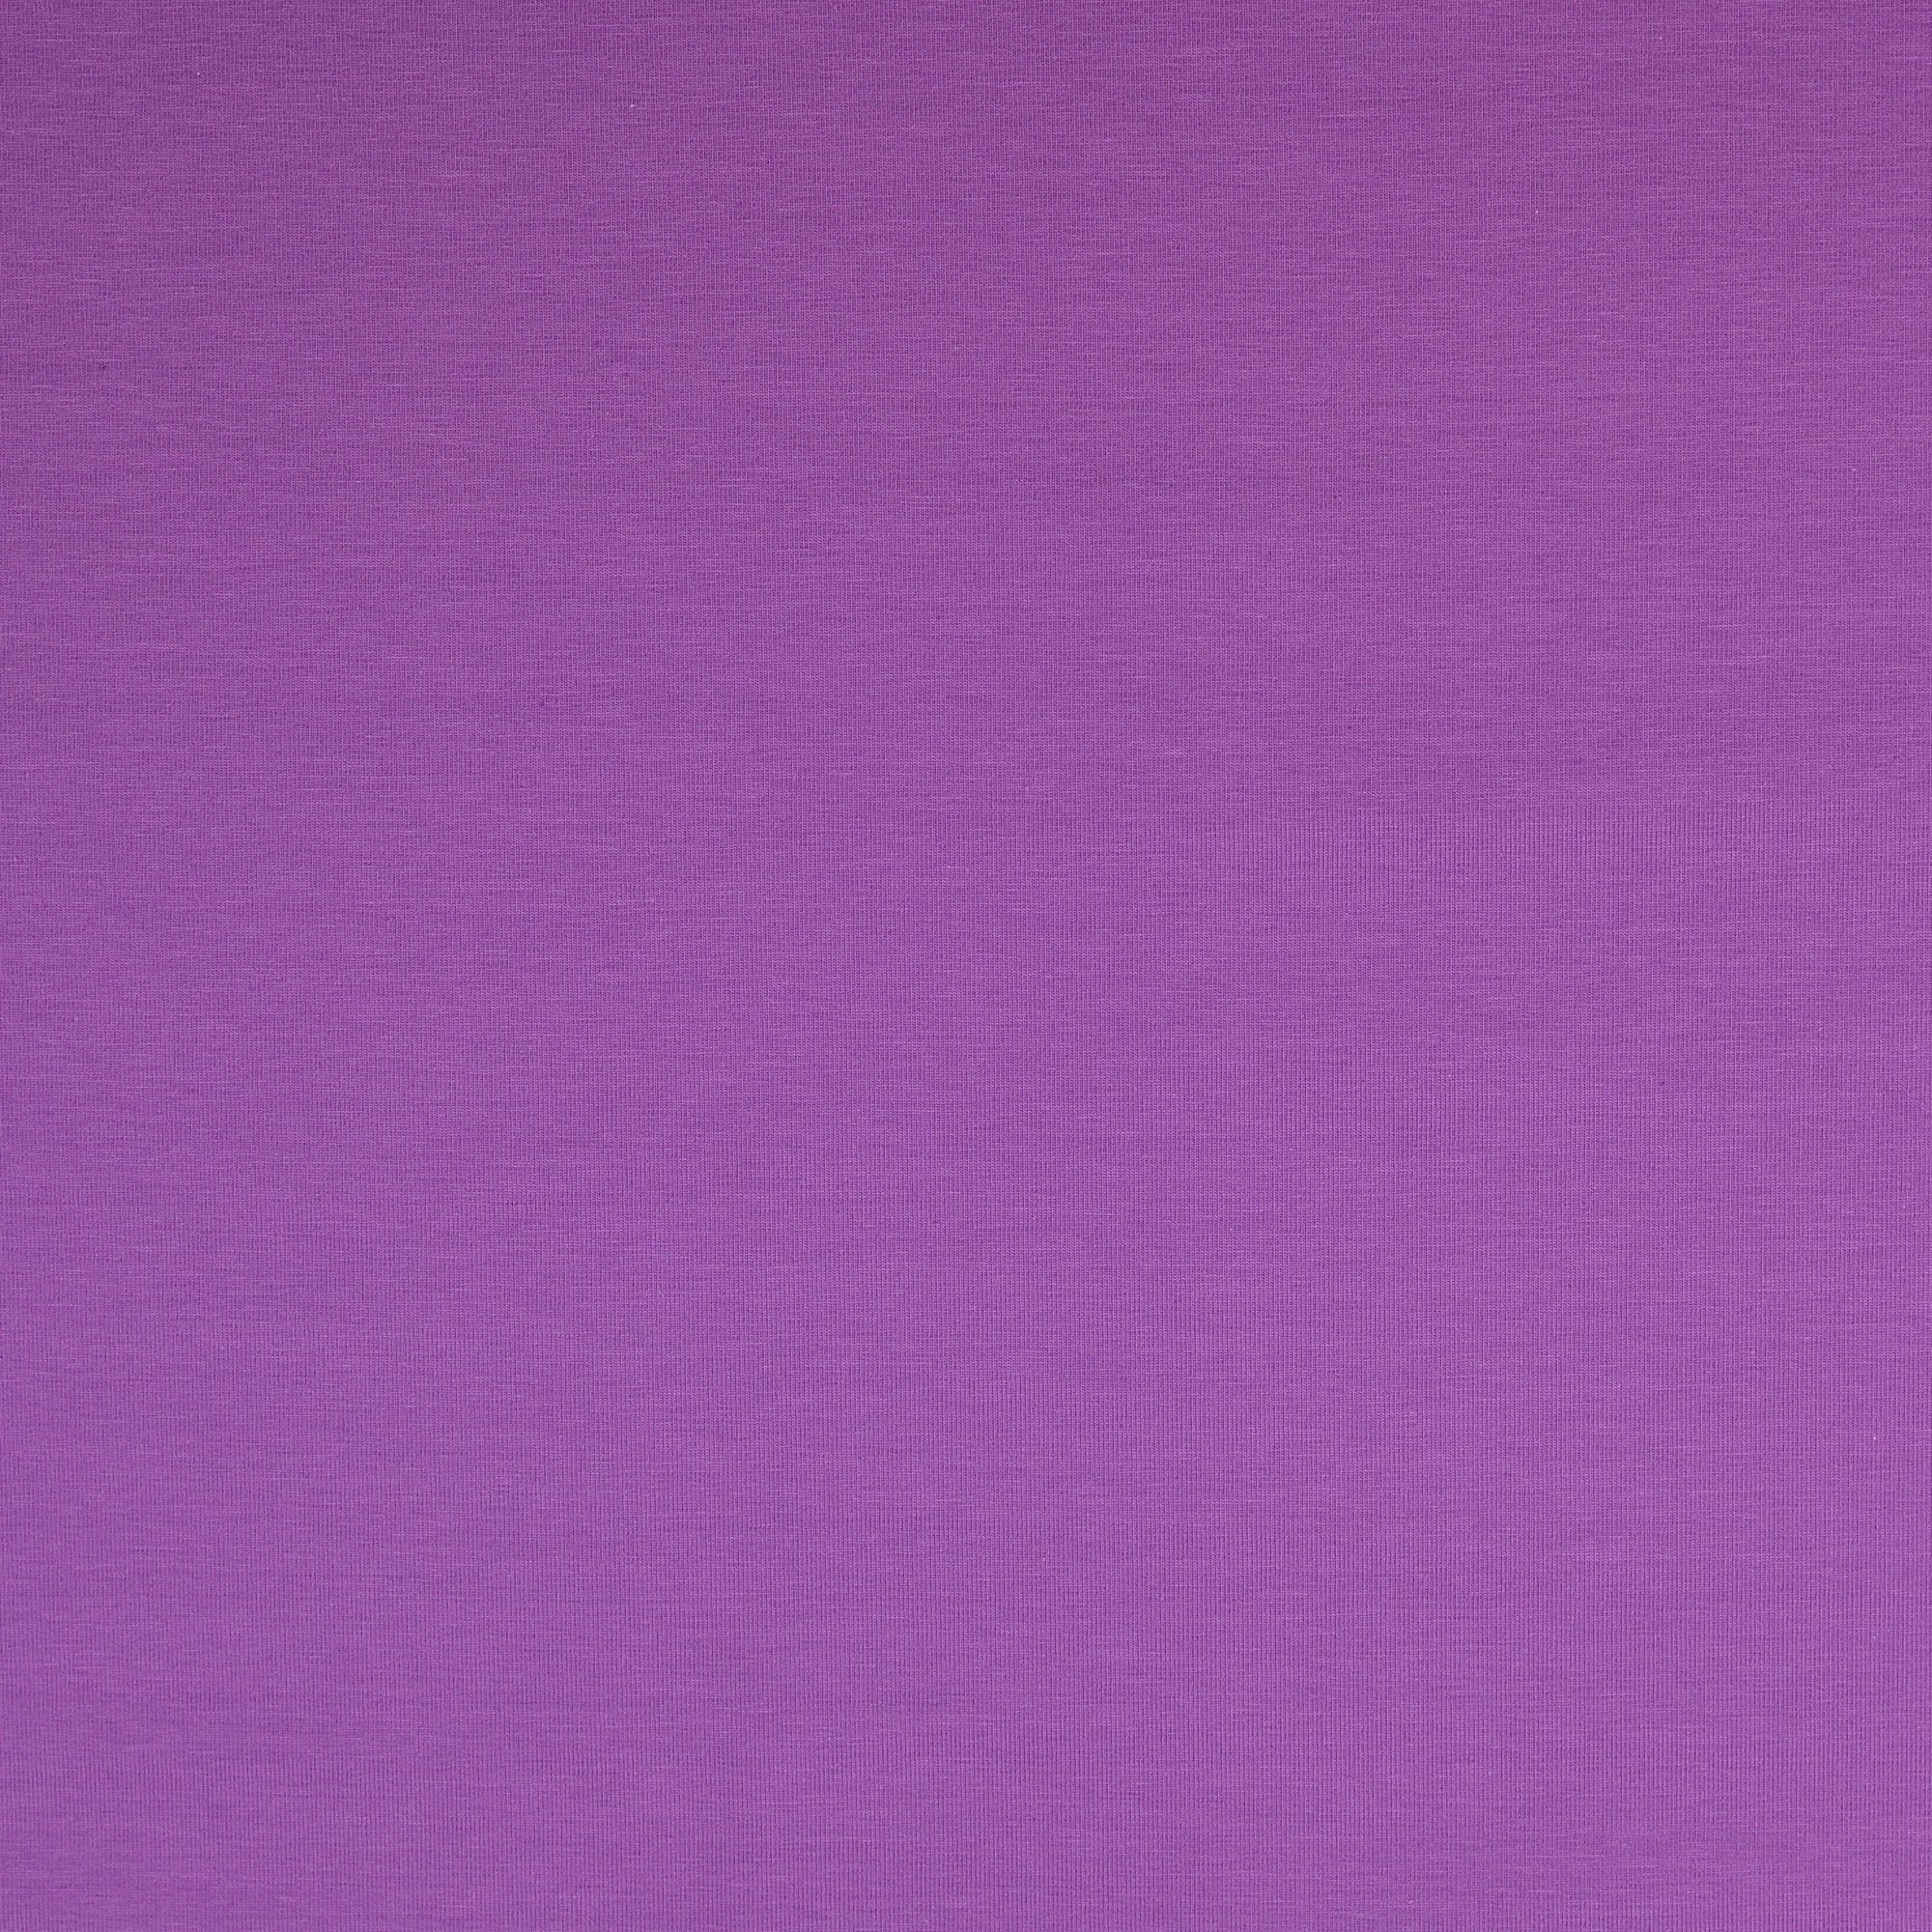 Essential Chic Lavender Cotton Jersey Fabric